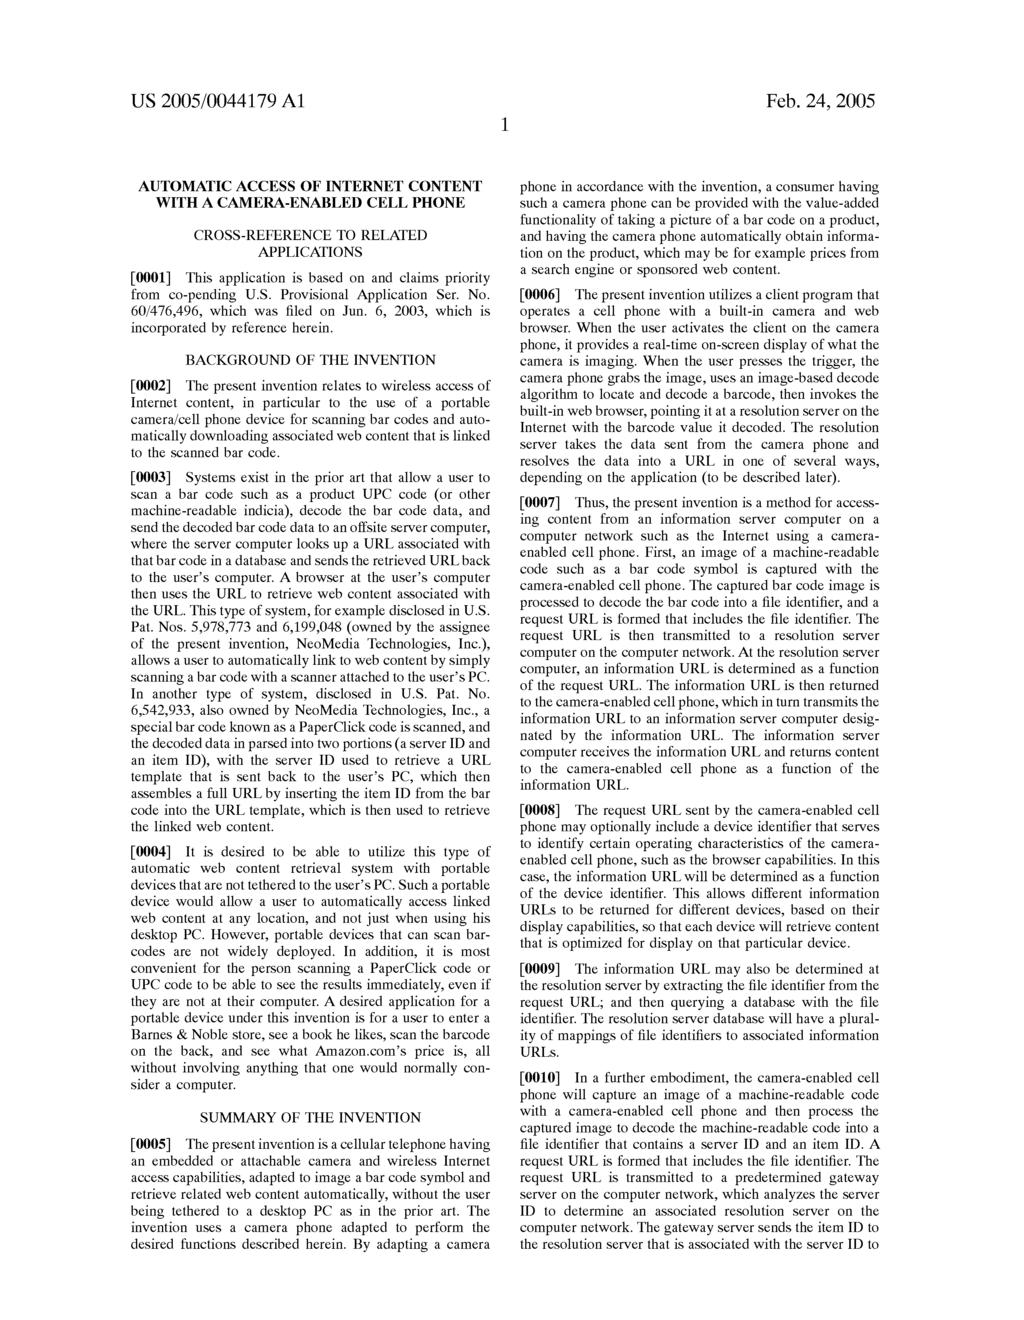 US 2005/0044179 A1 Feb. 24, 2005 AUTOMATIC ACCESS OF INTERNET CONTENT WITH A CAMERA-ENABLED CELL PHONE CROSS-REFERENCE TO RELATED APPLICATIONS 0001.